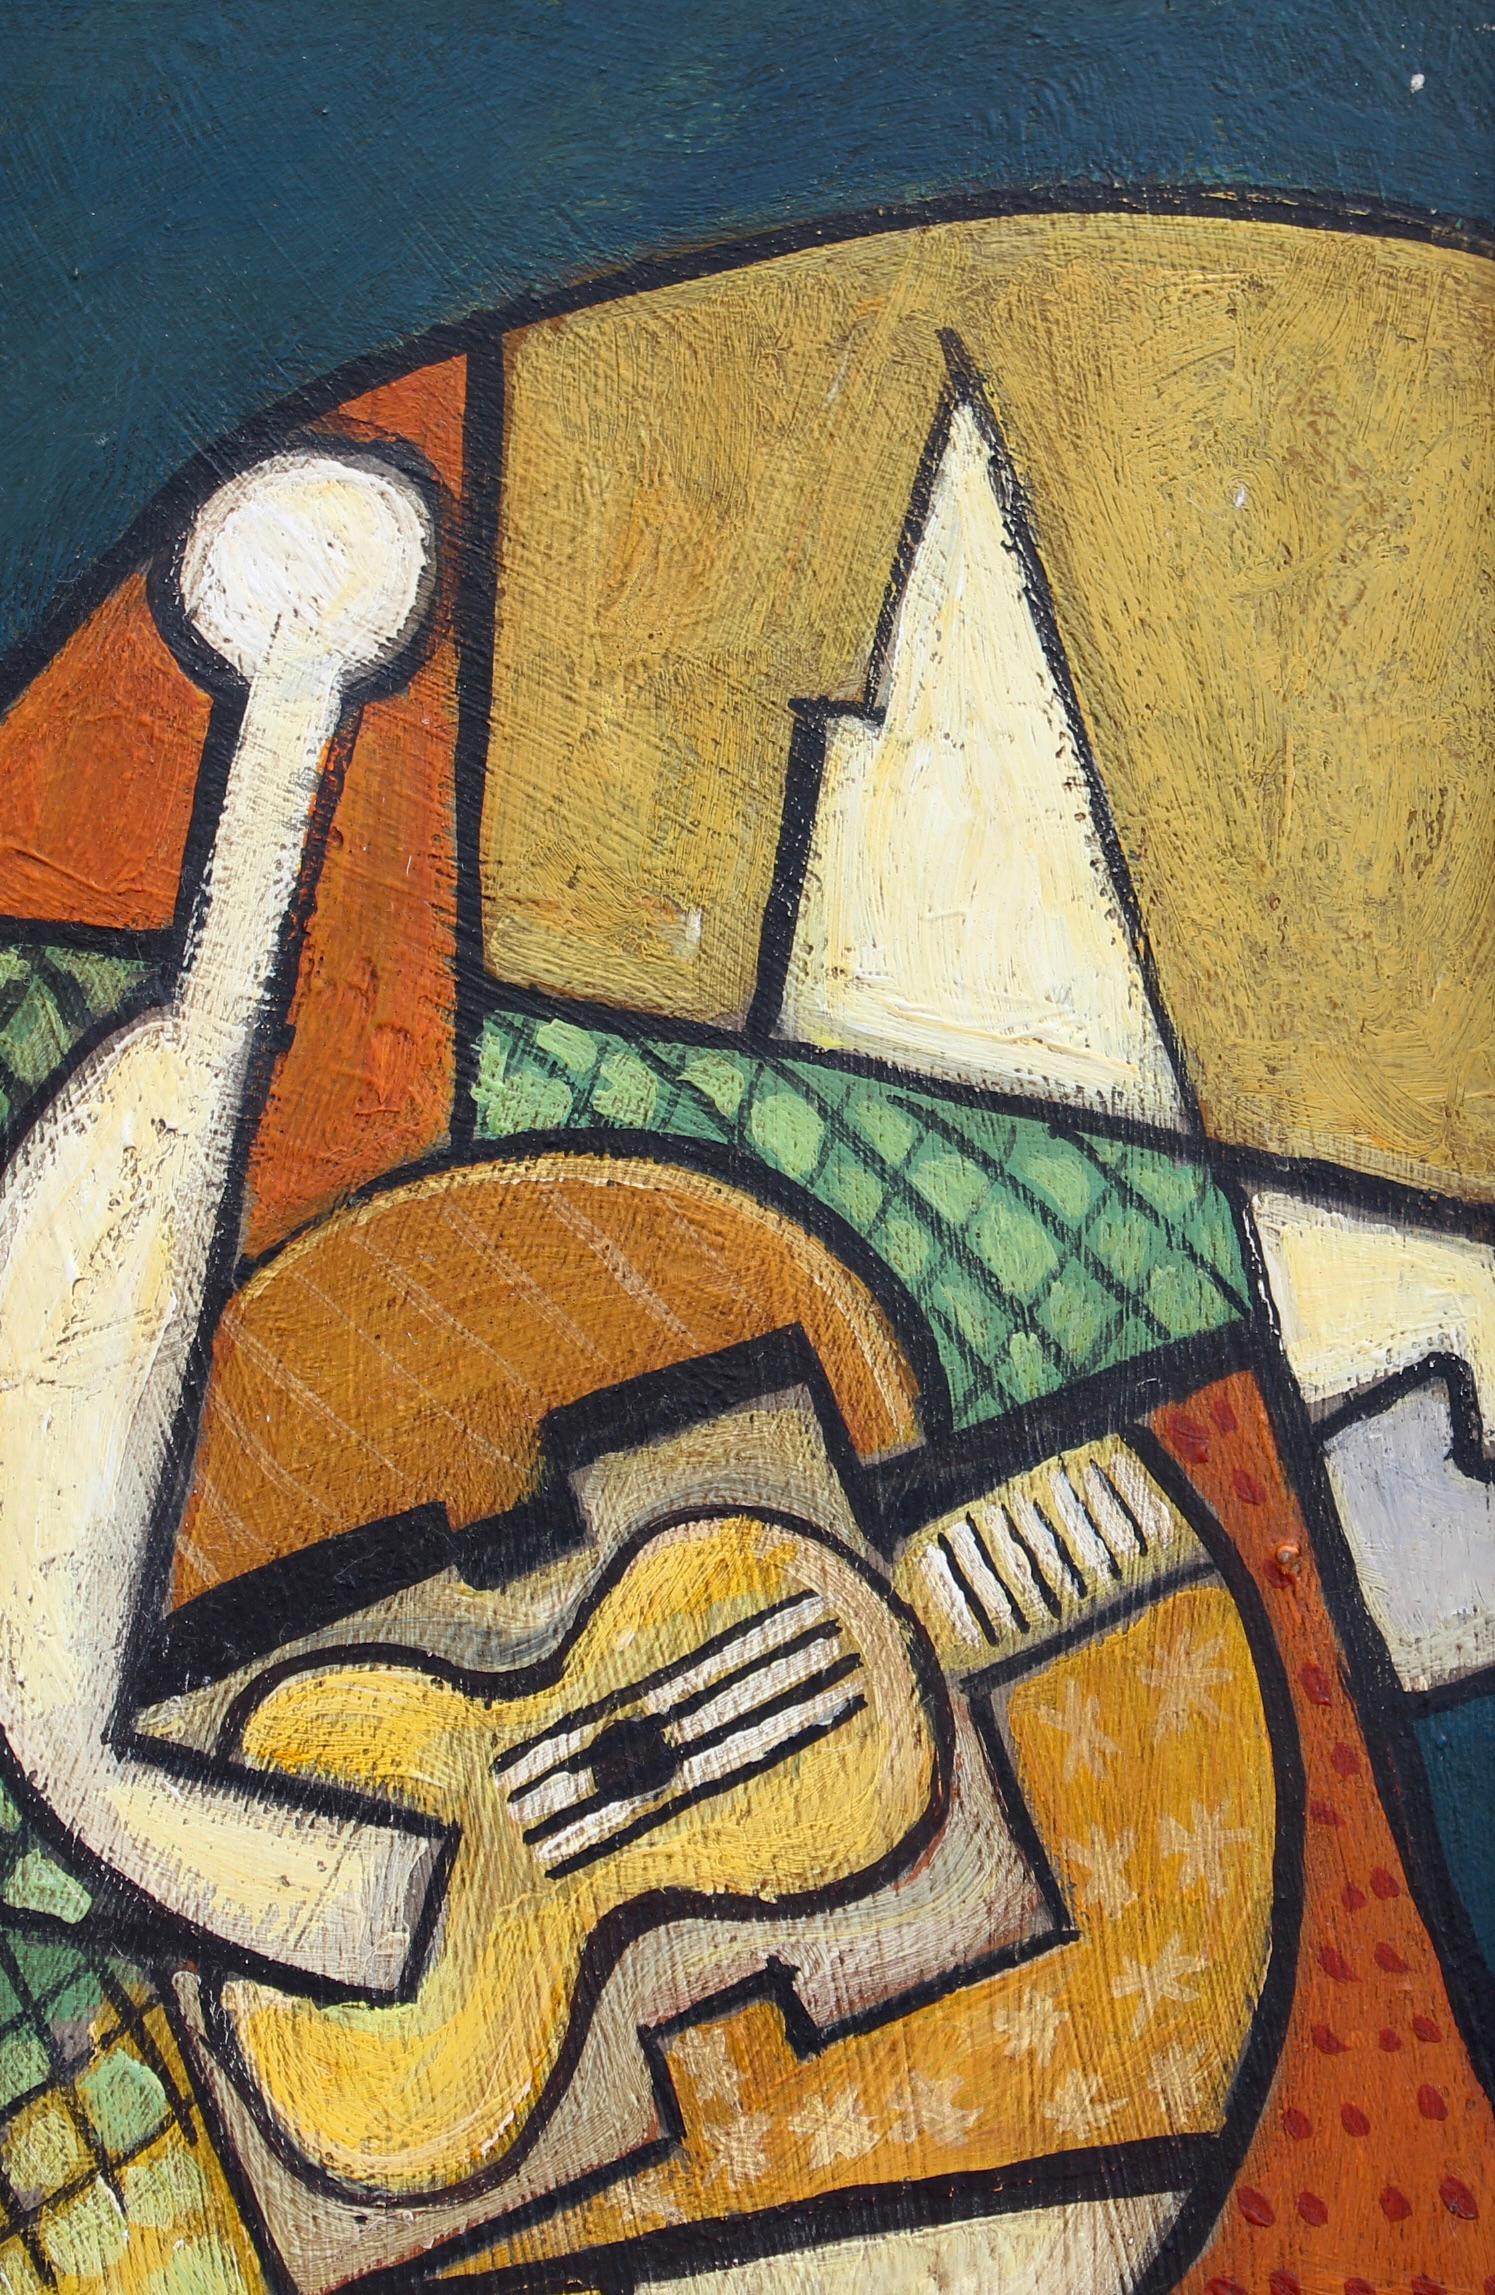 'Portrait of a Man Playing Guitar', oil on board, Berlin School (circa 1960s). Clearly inspired by Georges Braque's (1882-1963) and Juan Gris' (1887-1927) works, this painting is similar to experimental representations by both Braque as well as